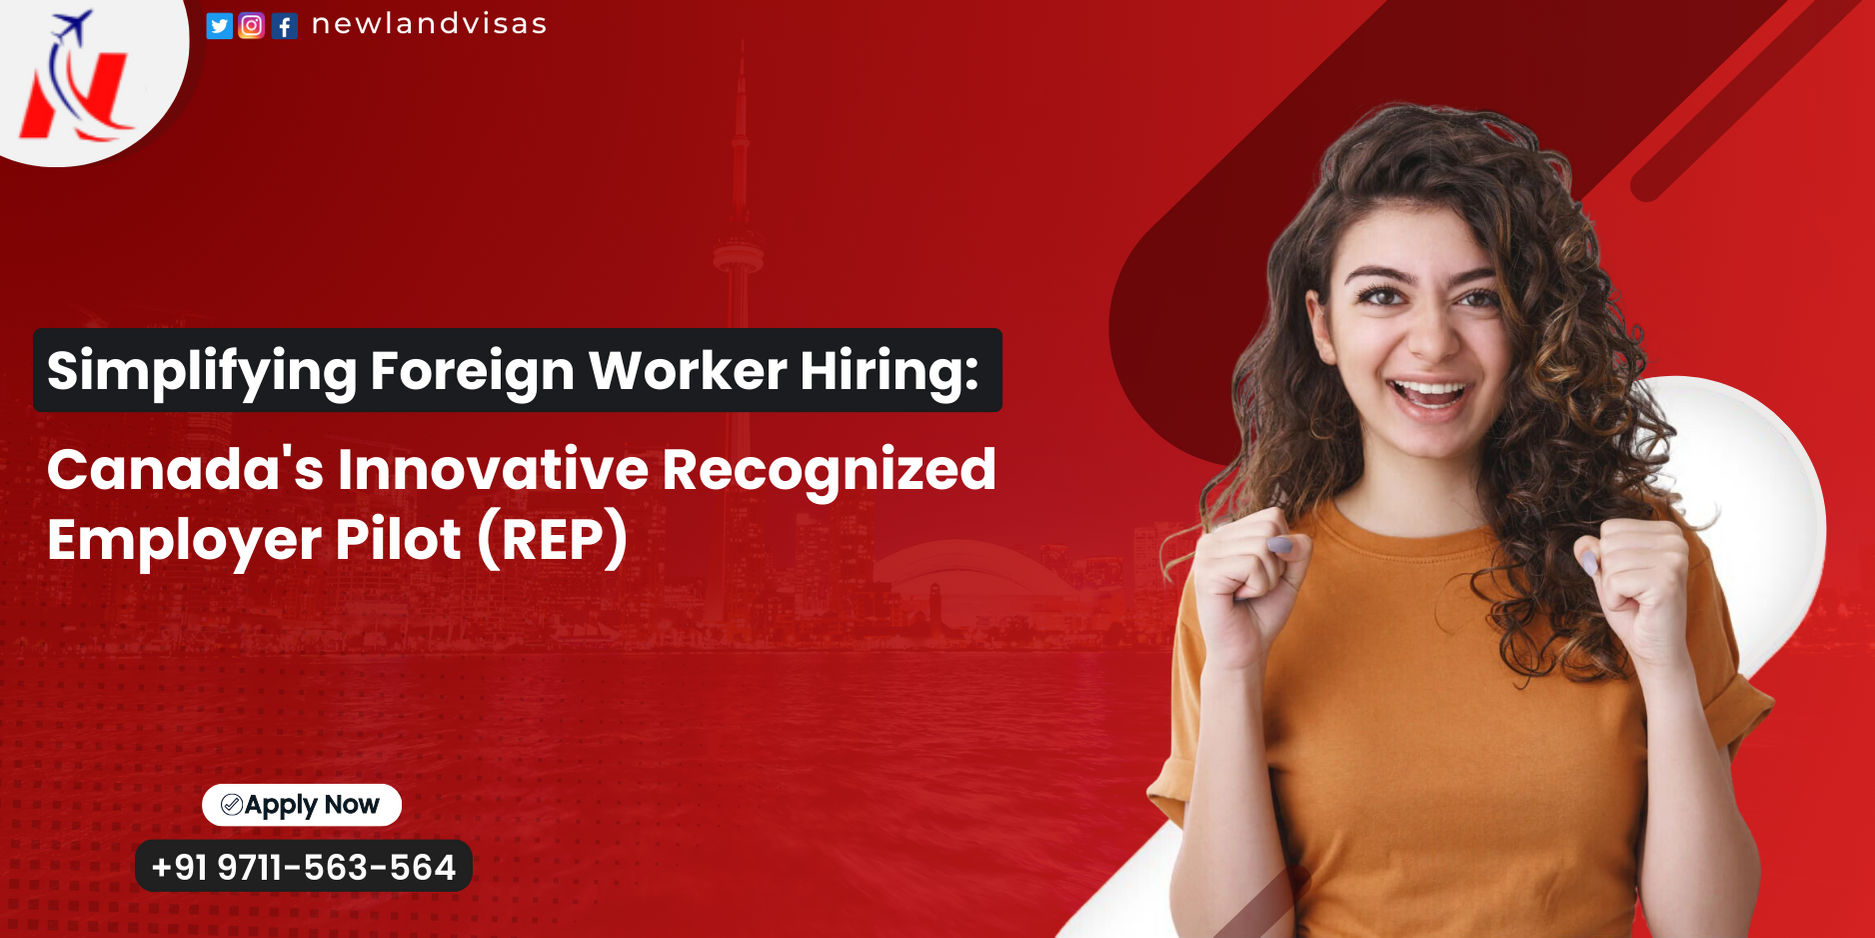 Simplifying Foreign Worker Hiring: Canada's Innovative Recognized Employer Pilot (REP)